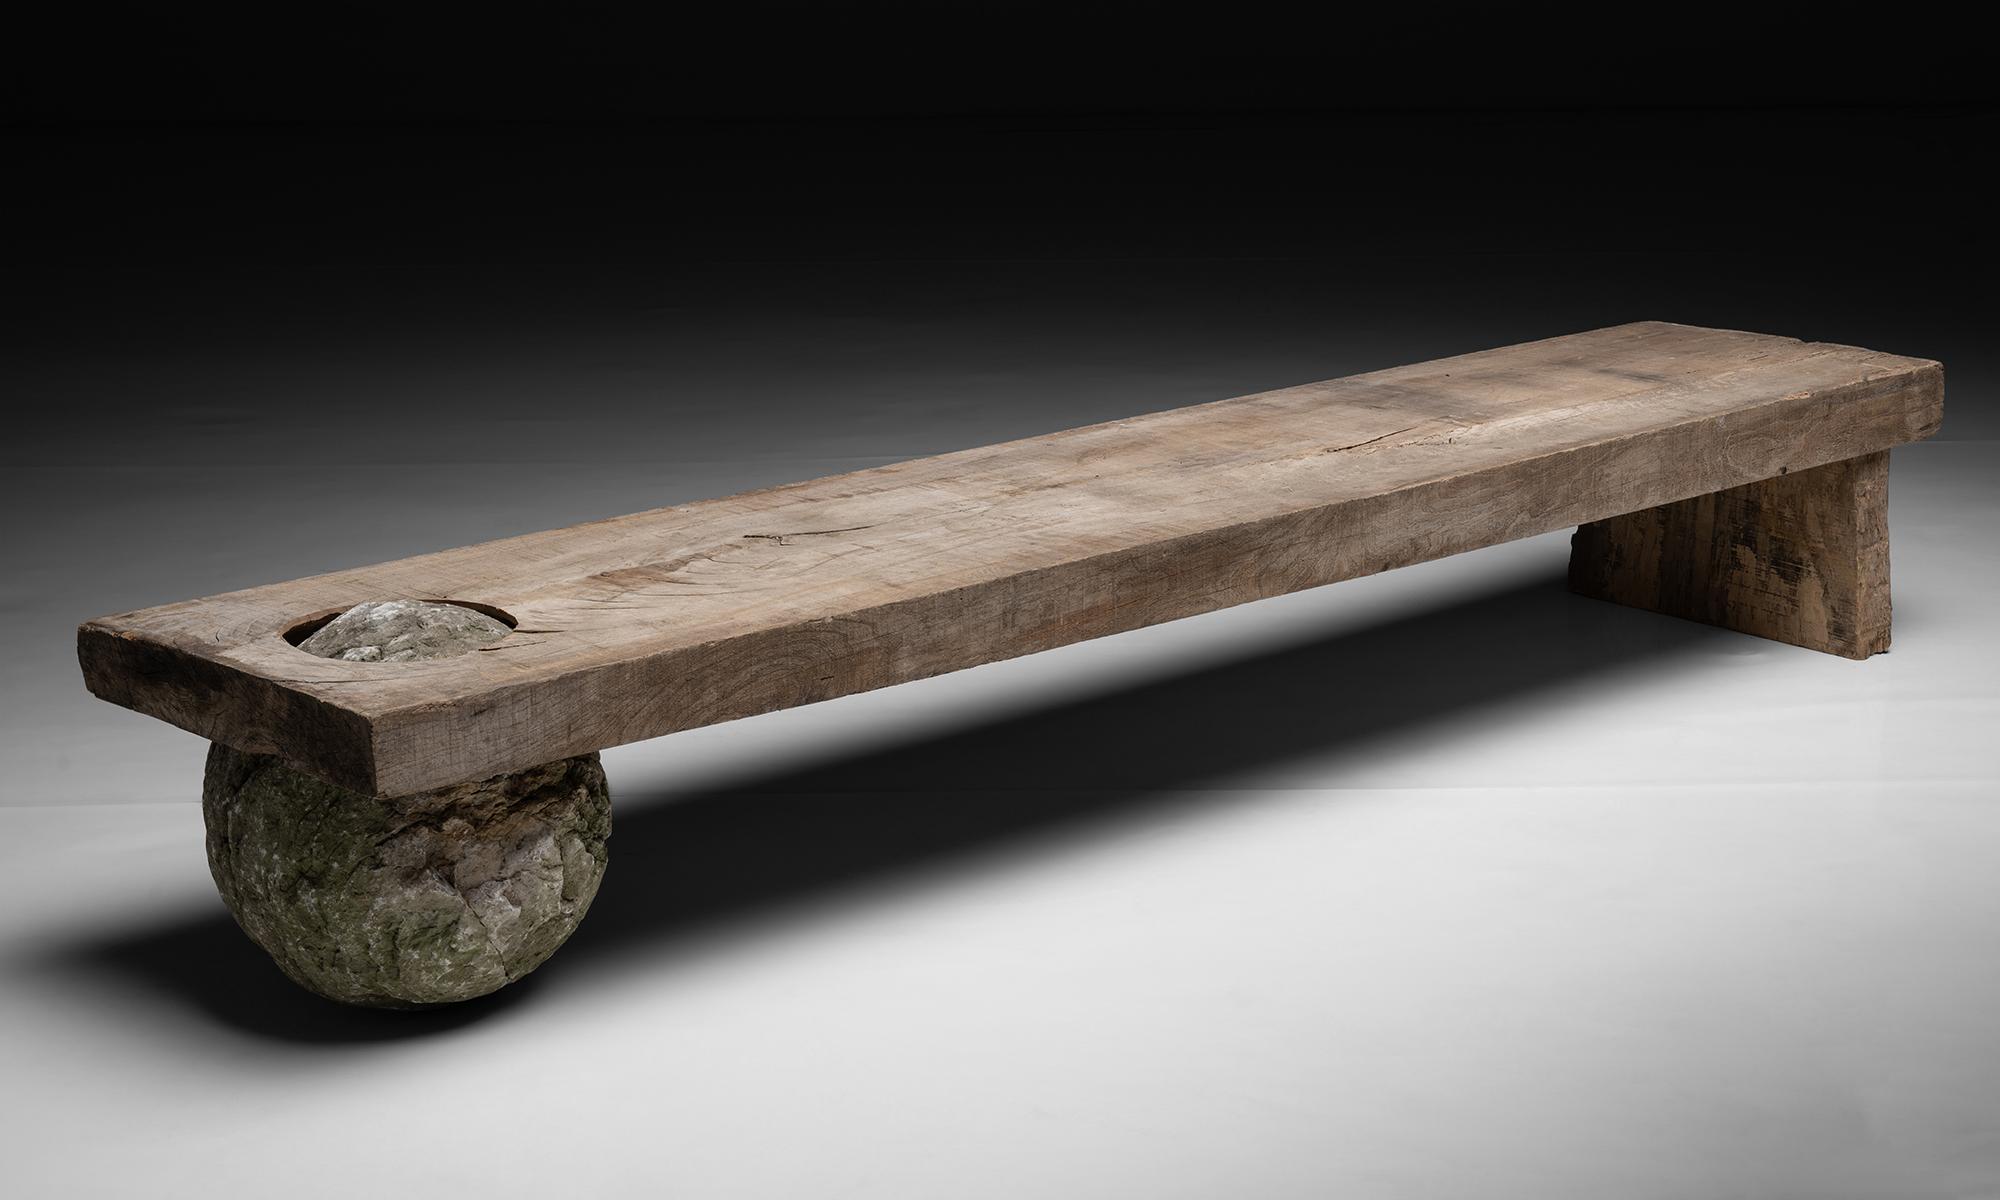 Primitive Concrete Ball & Slab Coffee Table

France circa 1950

Composed coffee table with slab top on 15th century stone ball

Measures 98.5”L x 20.25”d x 15.75”h




